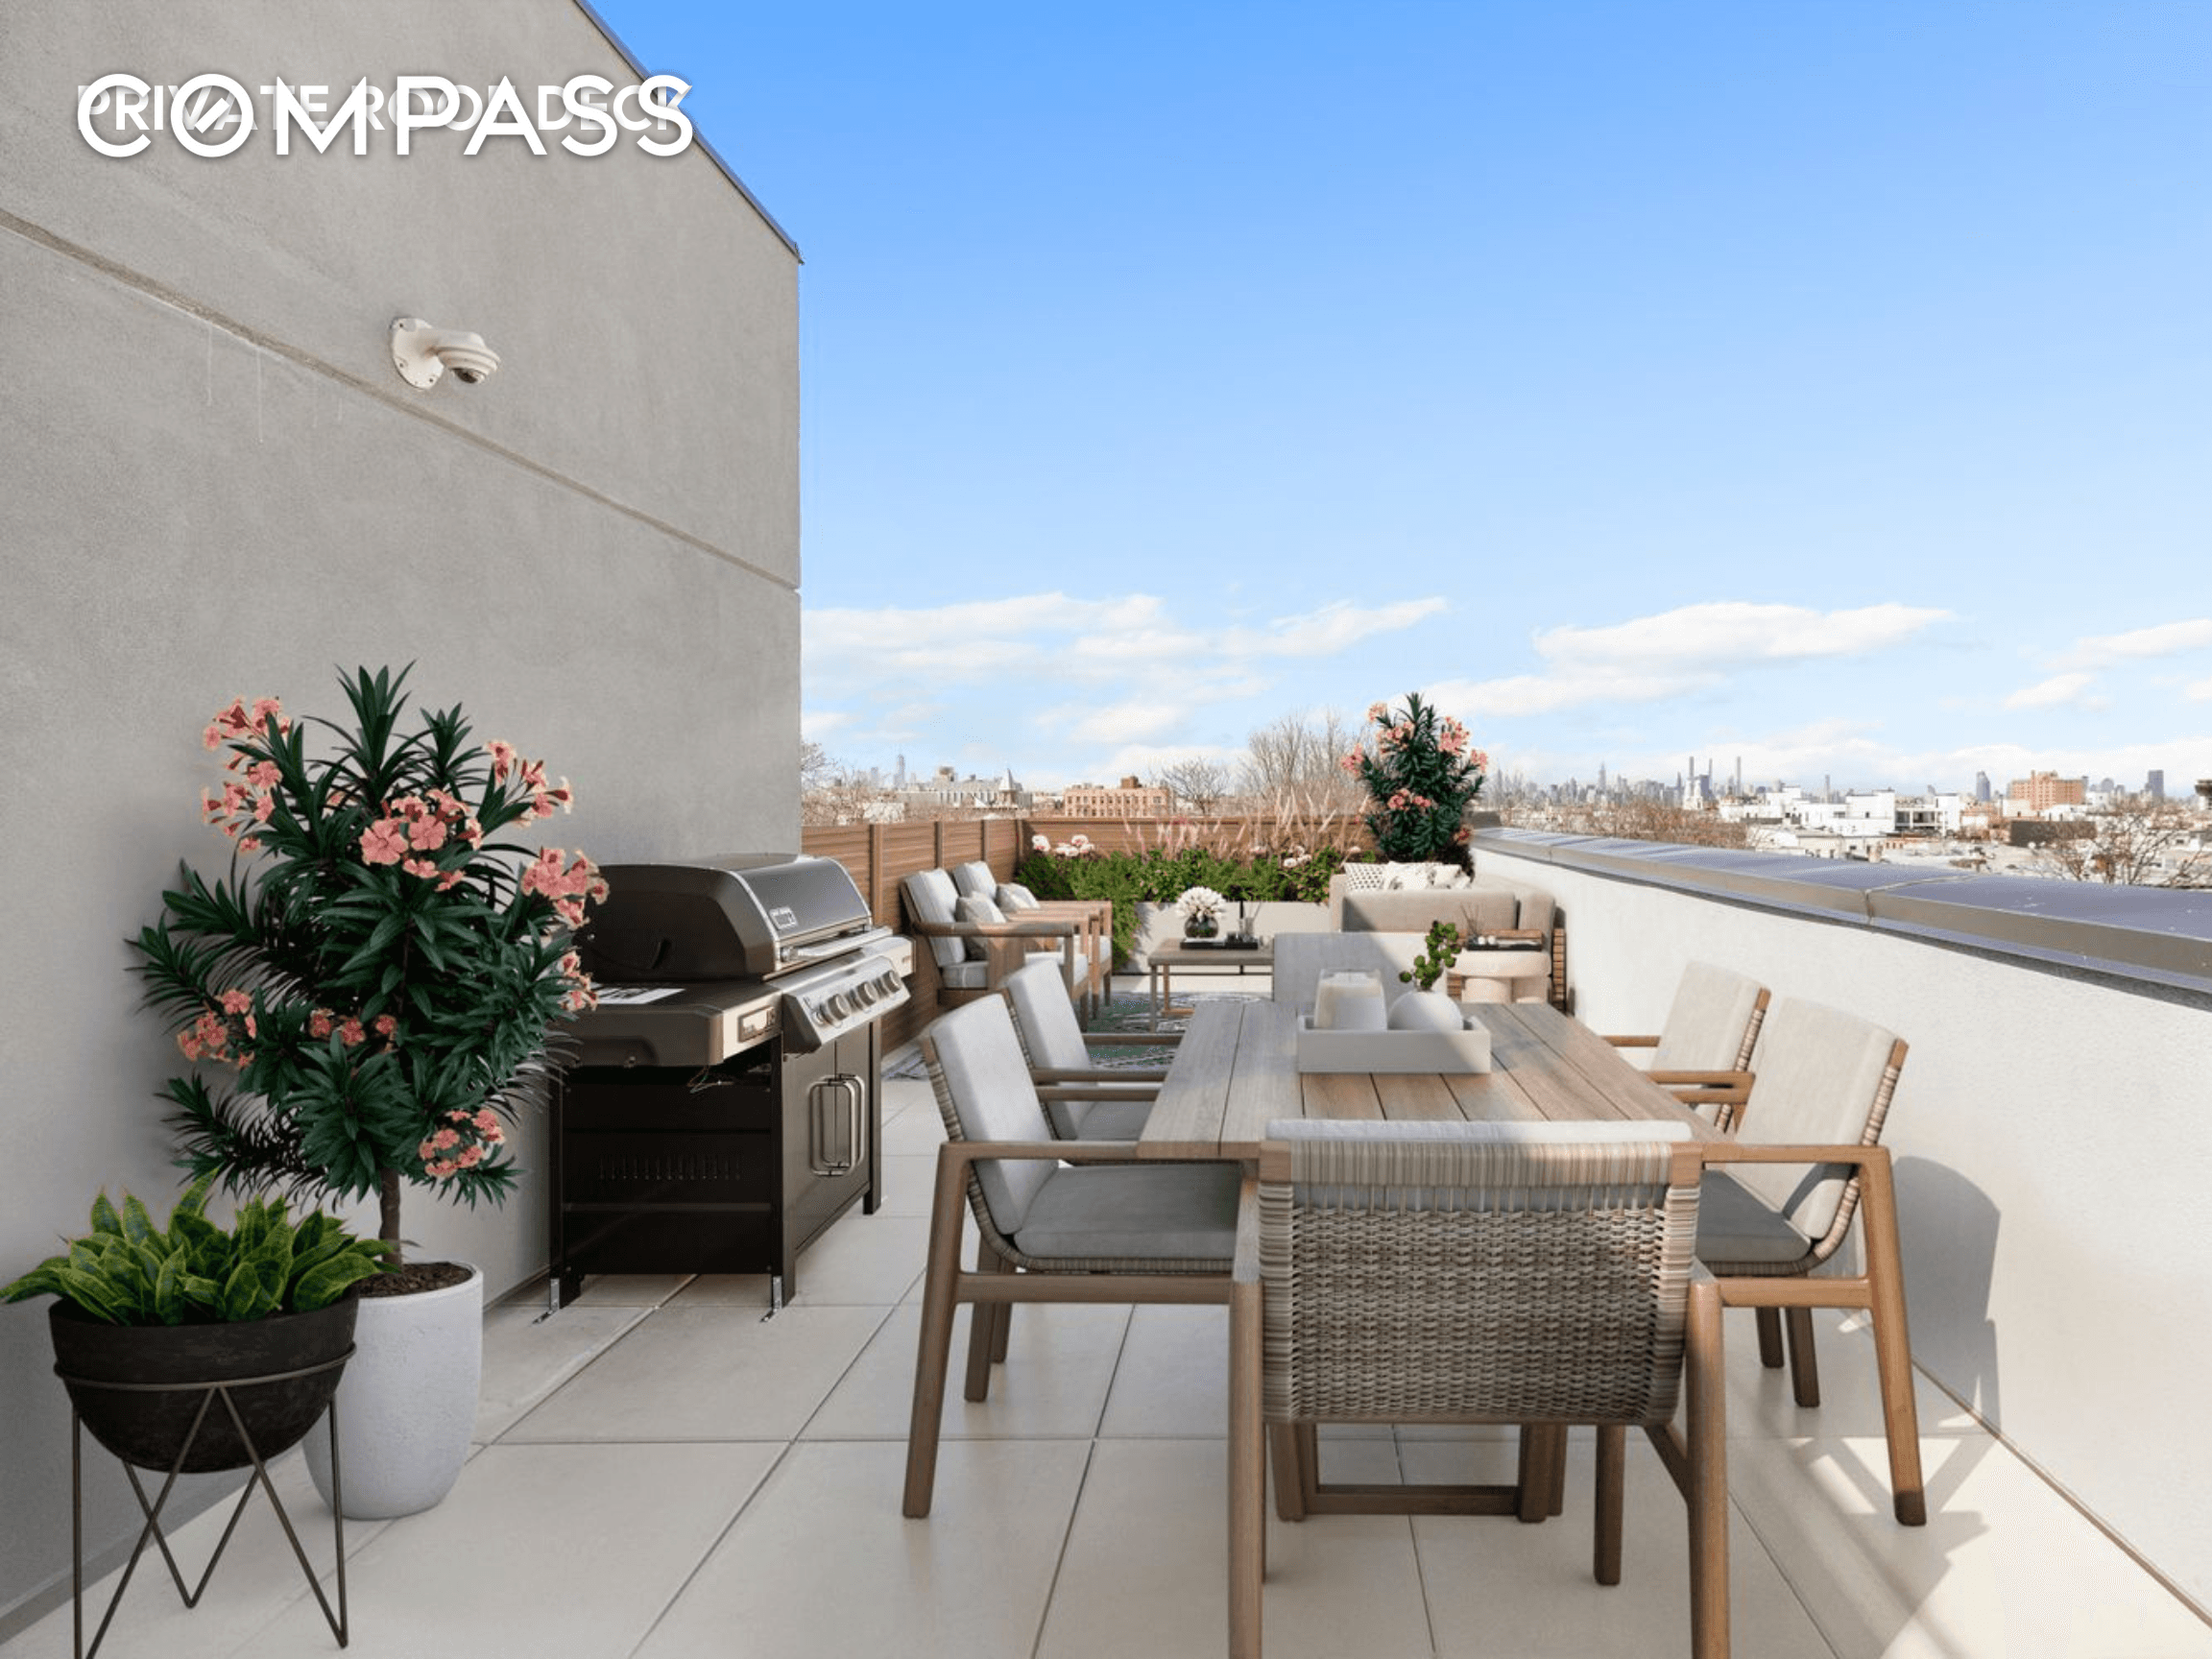 Experience the ultimate urban retreat in this two bedroom and two bathroom residence with your own private roof deck.